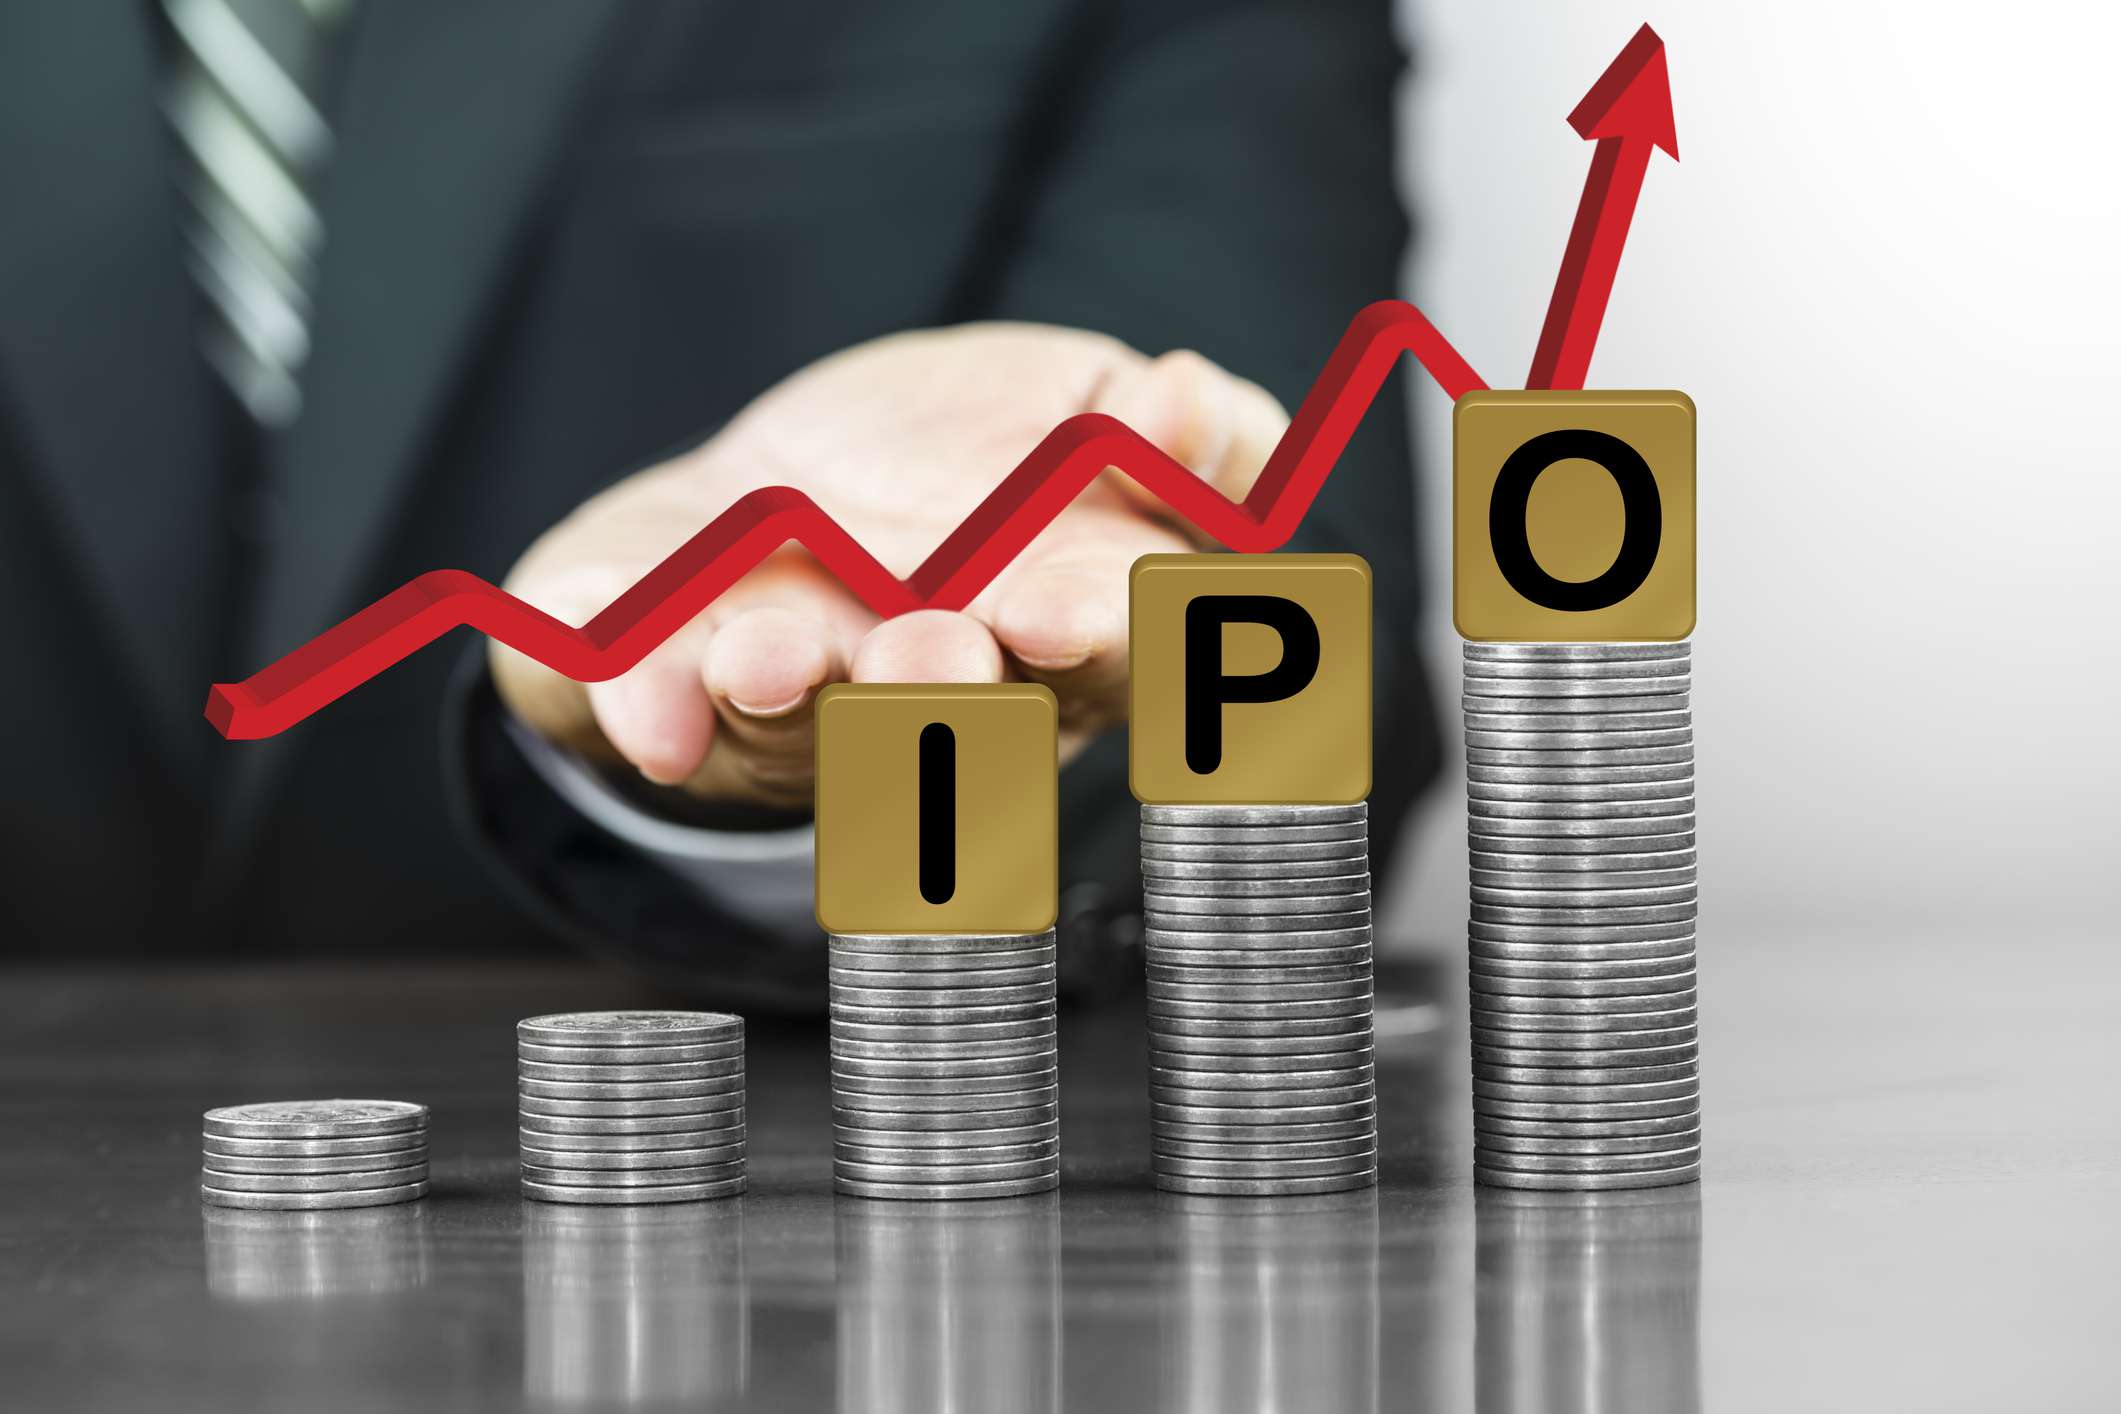 How to buy ipo stock